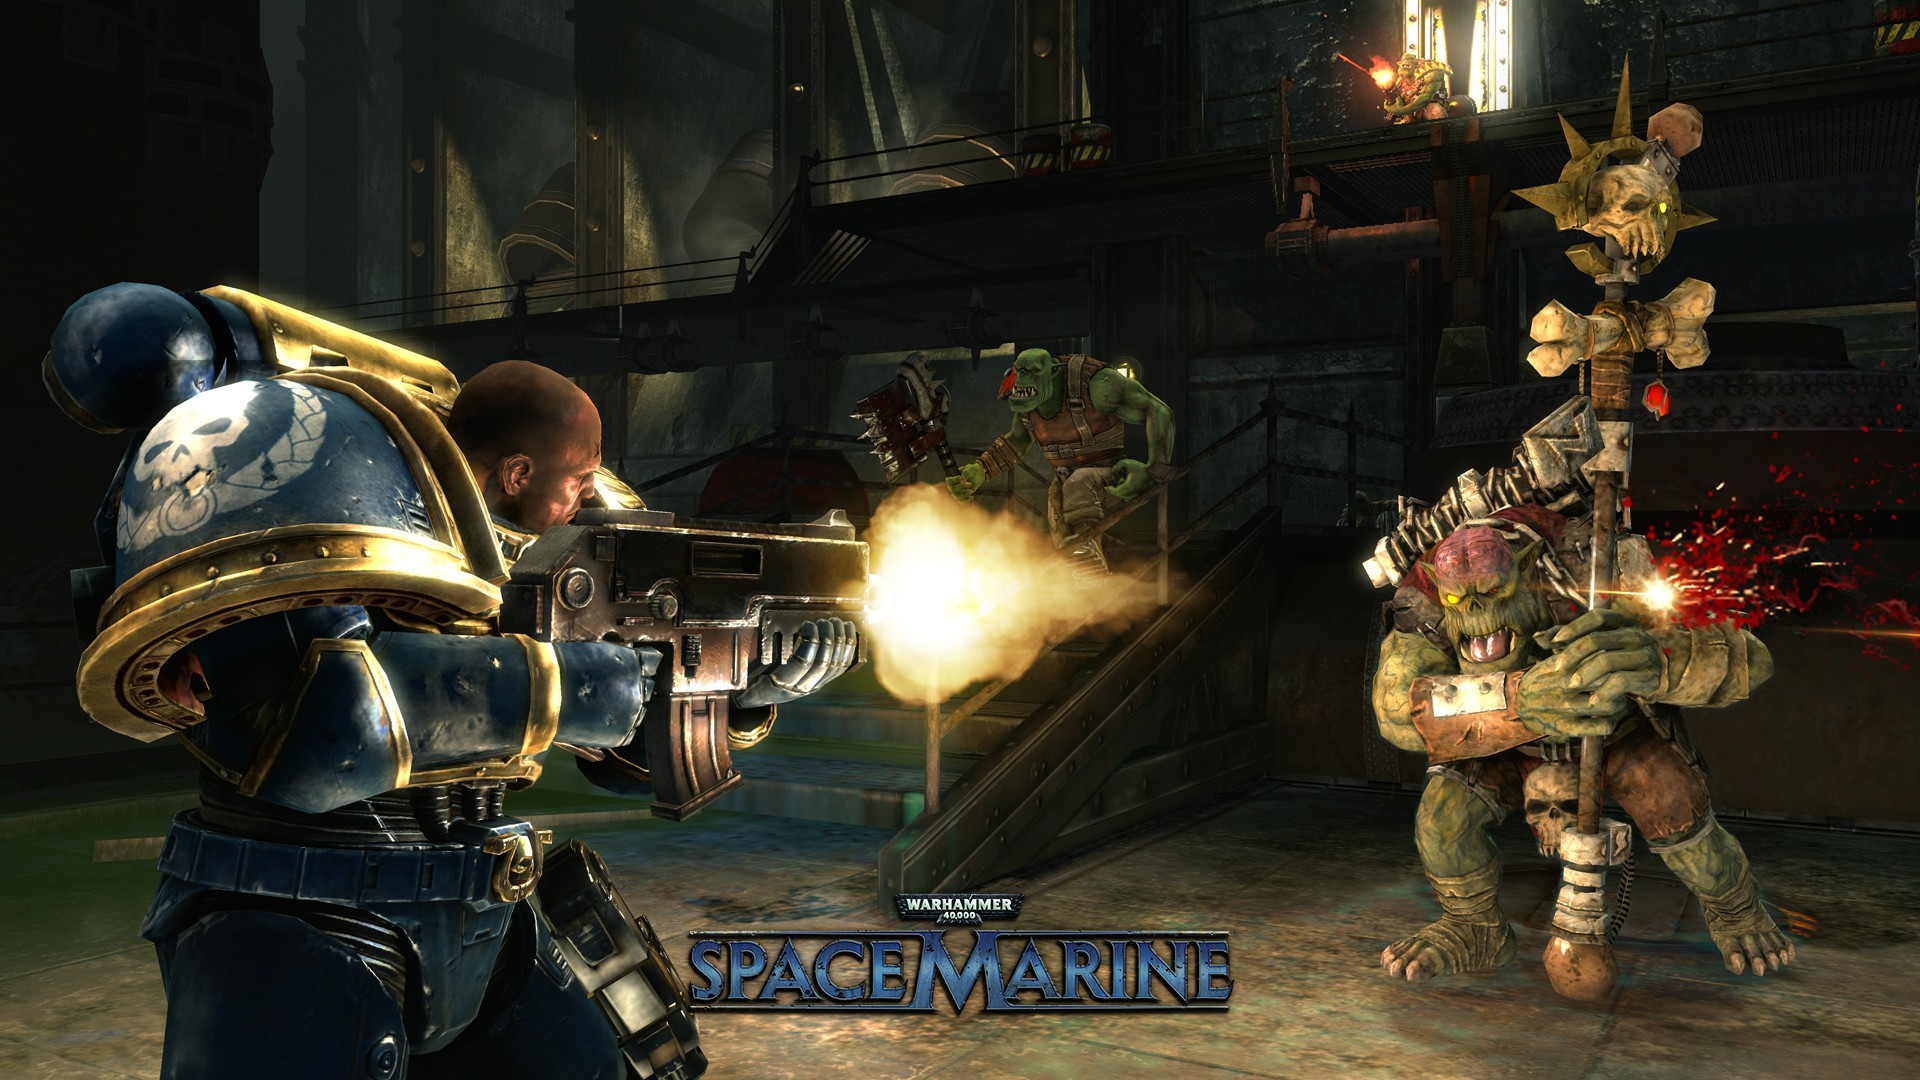 Space marine xbox 360 dlc torrent middle-earth shadow of mordor download torent pes